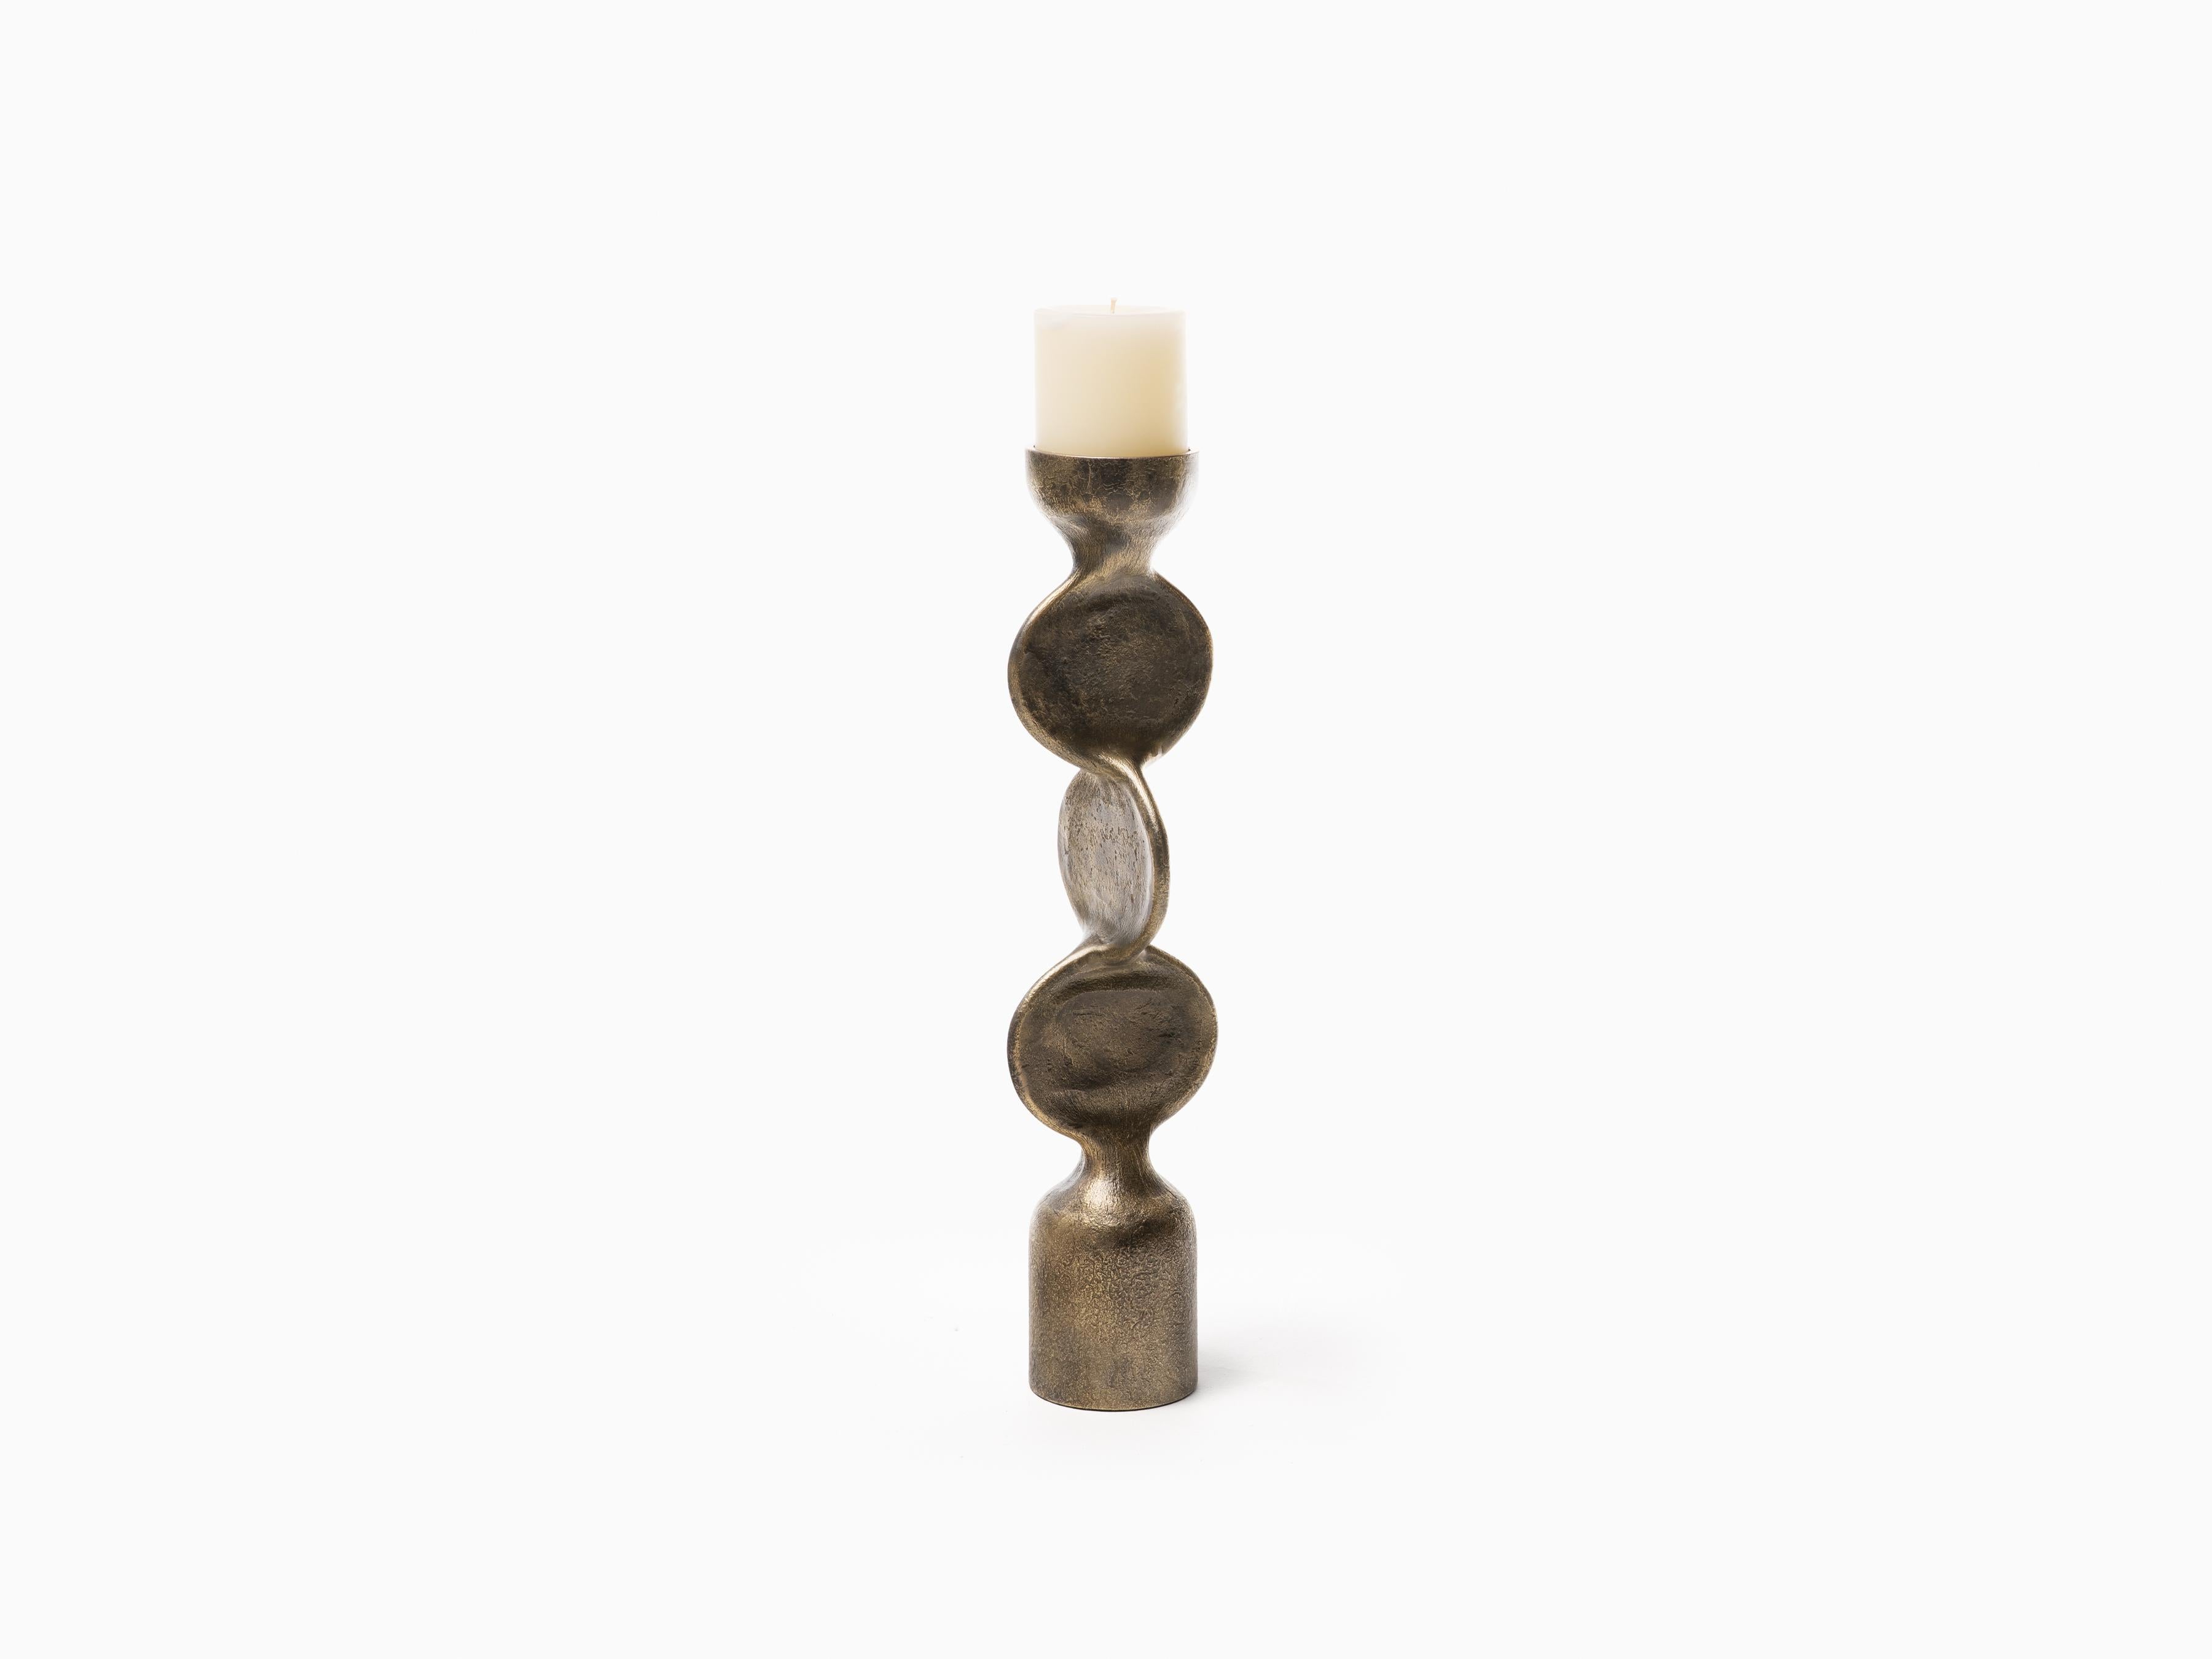 Whether they’re accessorized with candles or left nude as sculpture, the Vinca Candlesticks make a handsome addition to a bookcase, console, or end table. Arrange them in groups, or let their totemic forms stand on their own. > 2.75